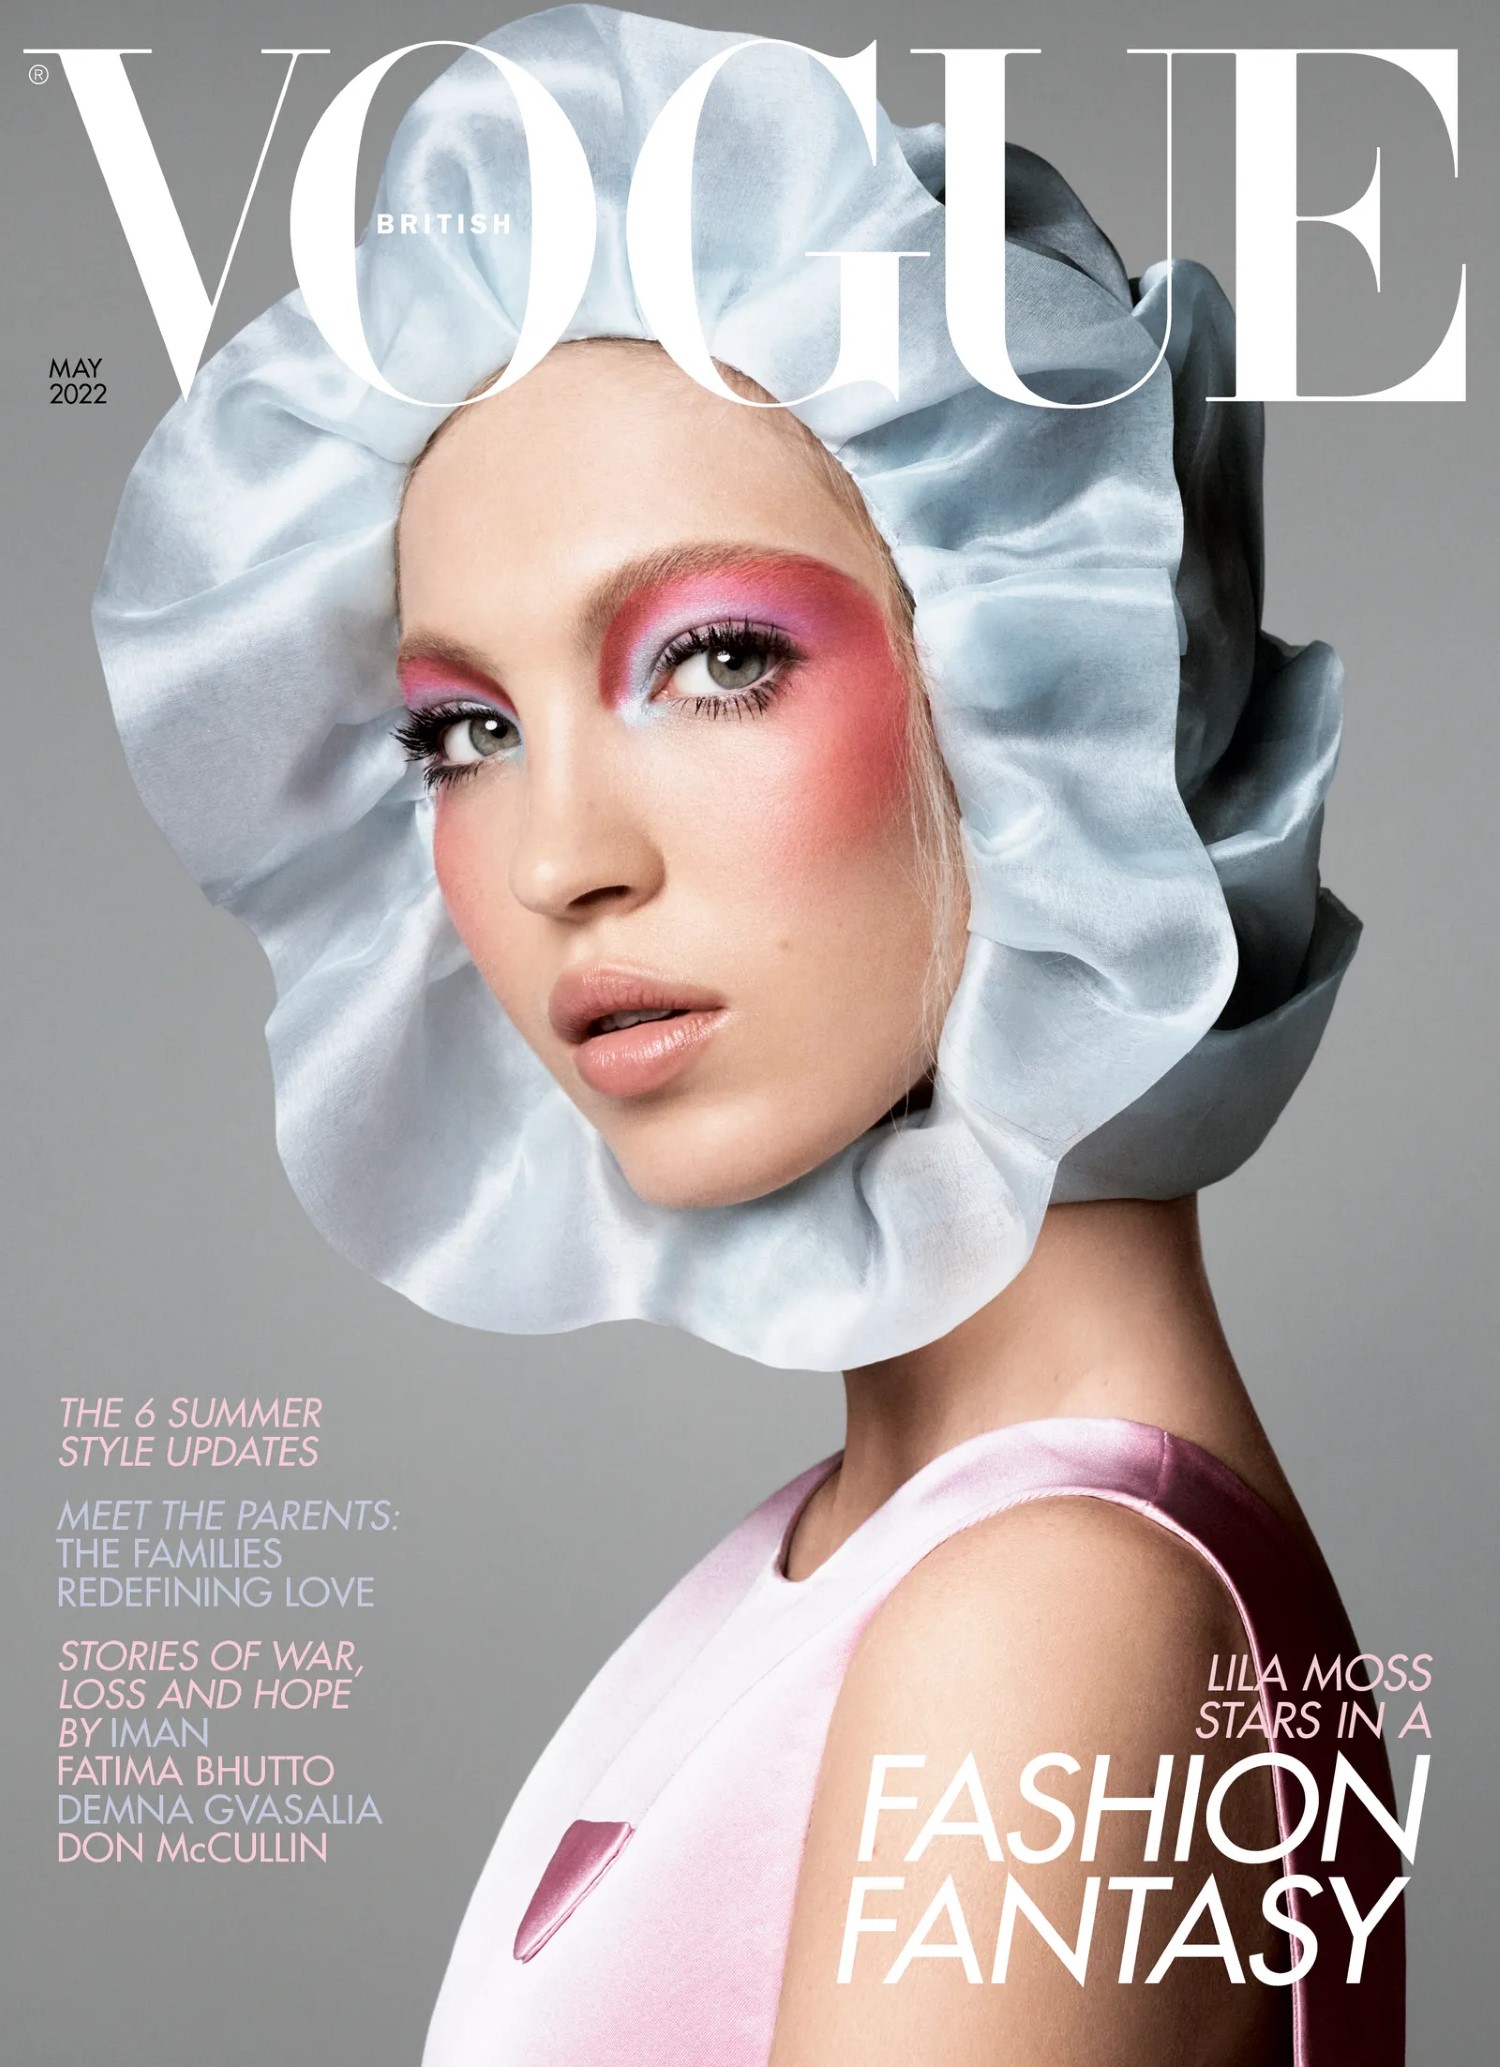 Lila Moss covers British Vogue May 2022 by Steven Meisel